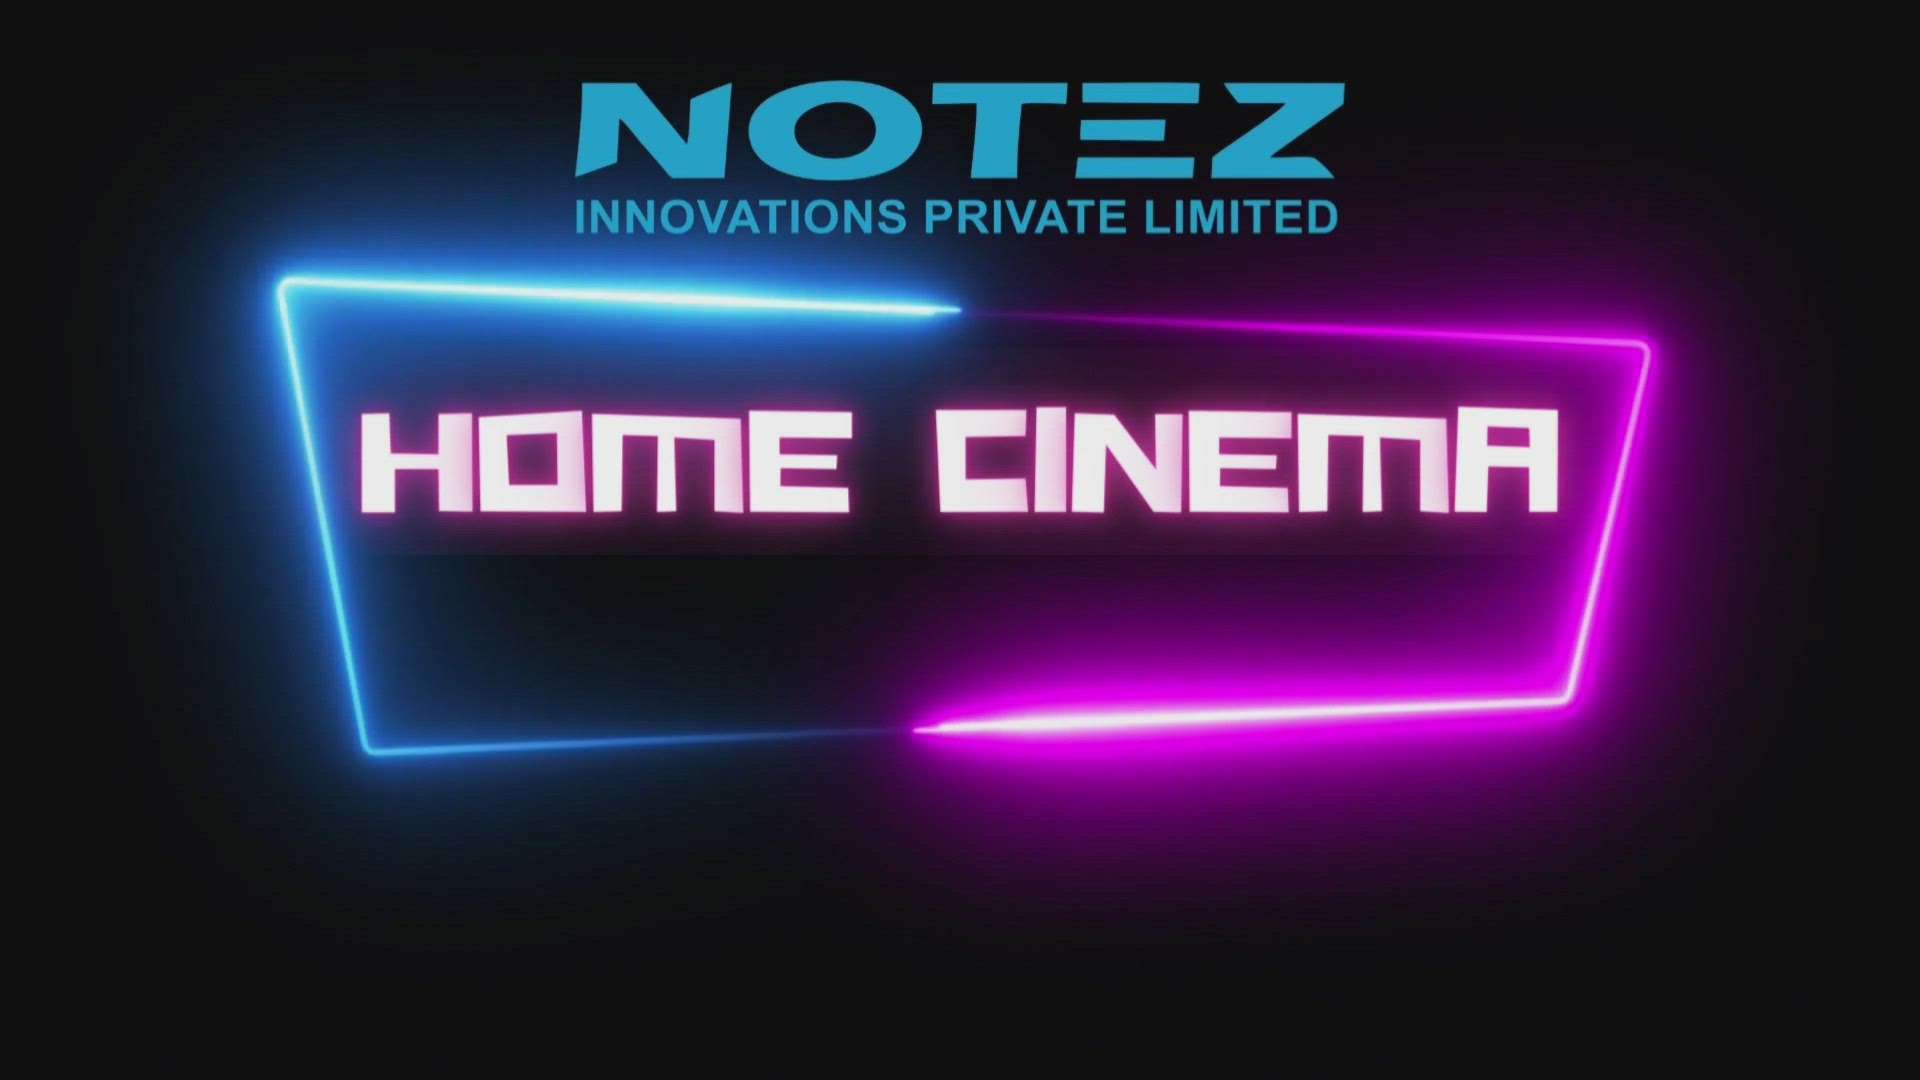 Successfully completed Home cinema 7.2.4( Dolby Atmos ) @kallara
Notez Innovations, "We build your dream home theatre with passion"
Your dream is our fuel, we will give you supreme home 
cinema experience in your budget.
For more info, contact us 
+91 98959 44366
+91 9061764435
+91 90748 19343